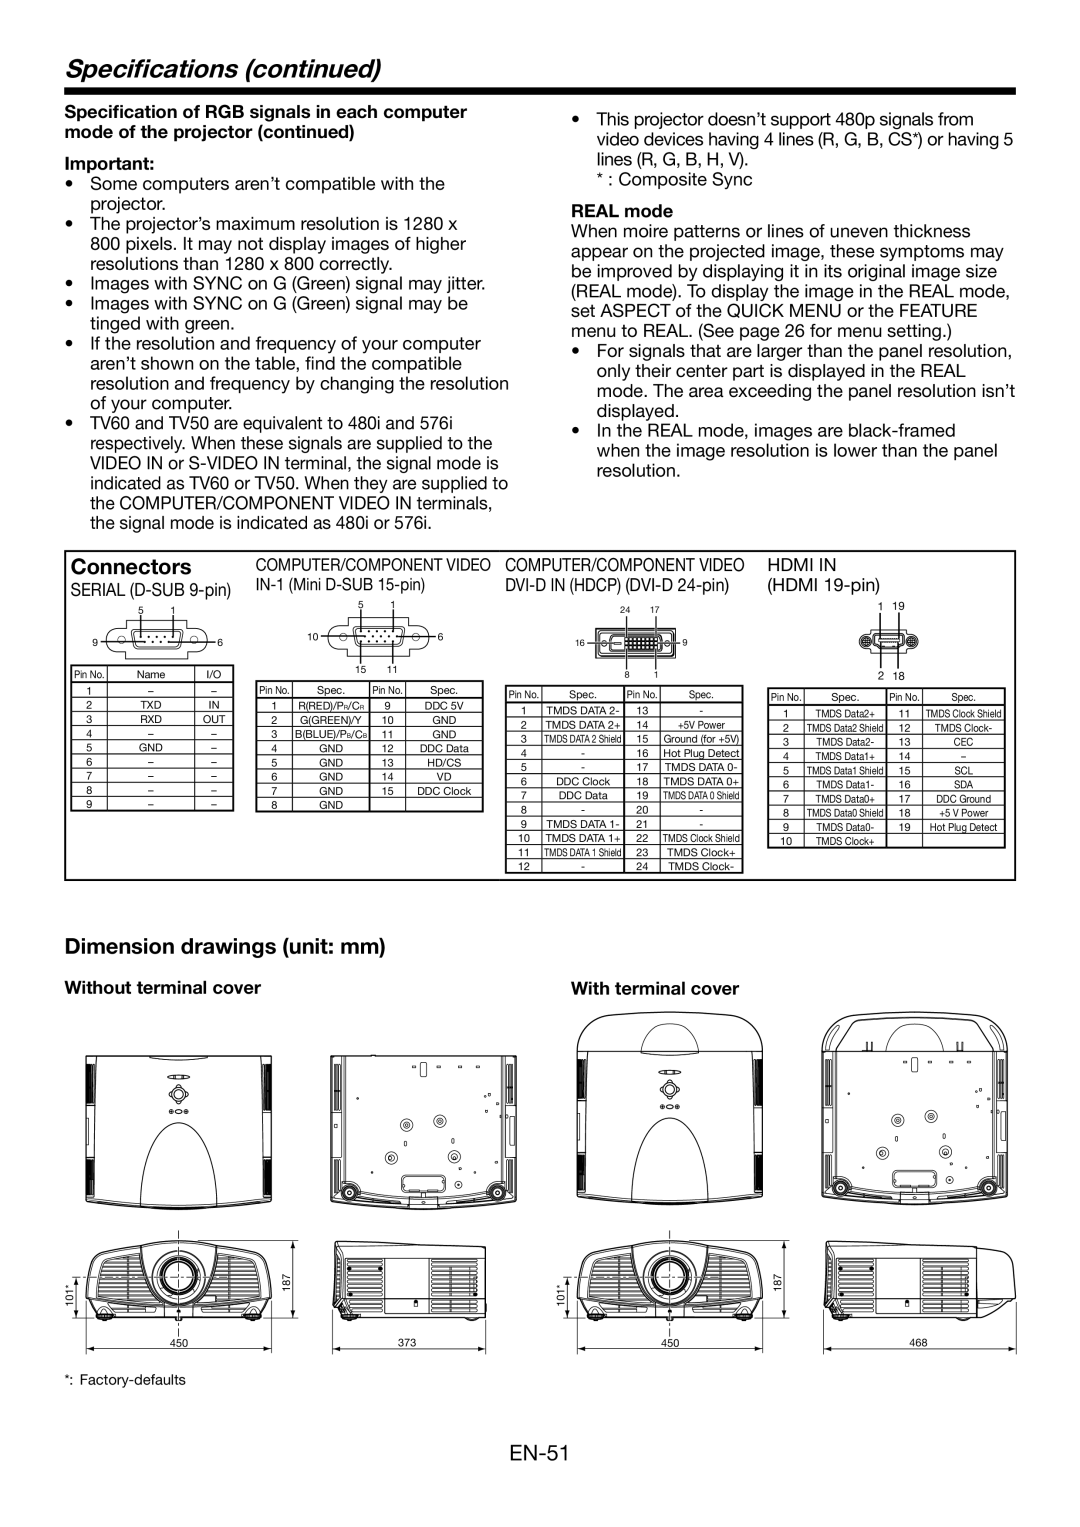 Mitsumi electronic WD3300U user manual Connectors, Dimension drawings unit mm, Specifications continued, REAL mode 